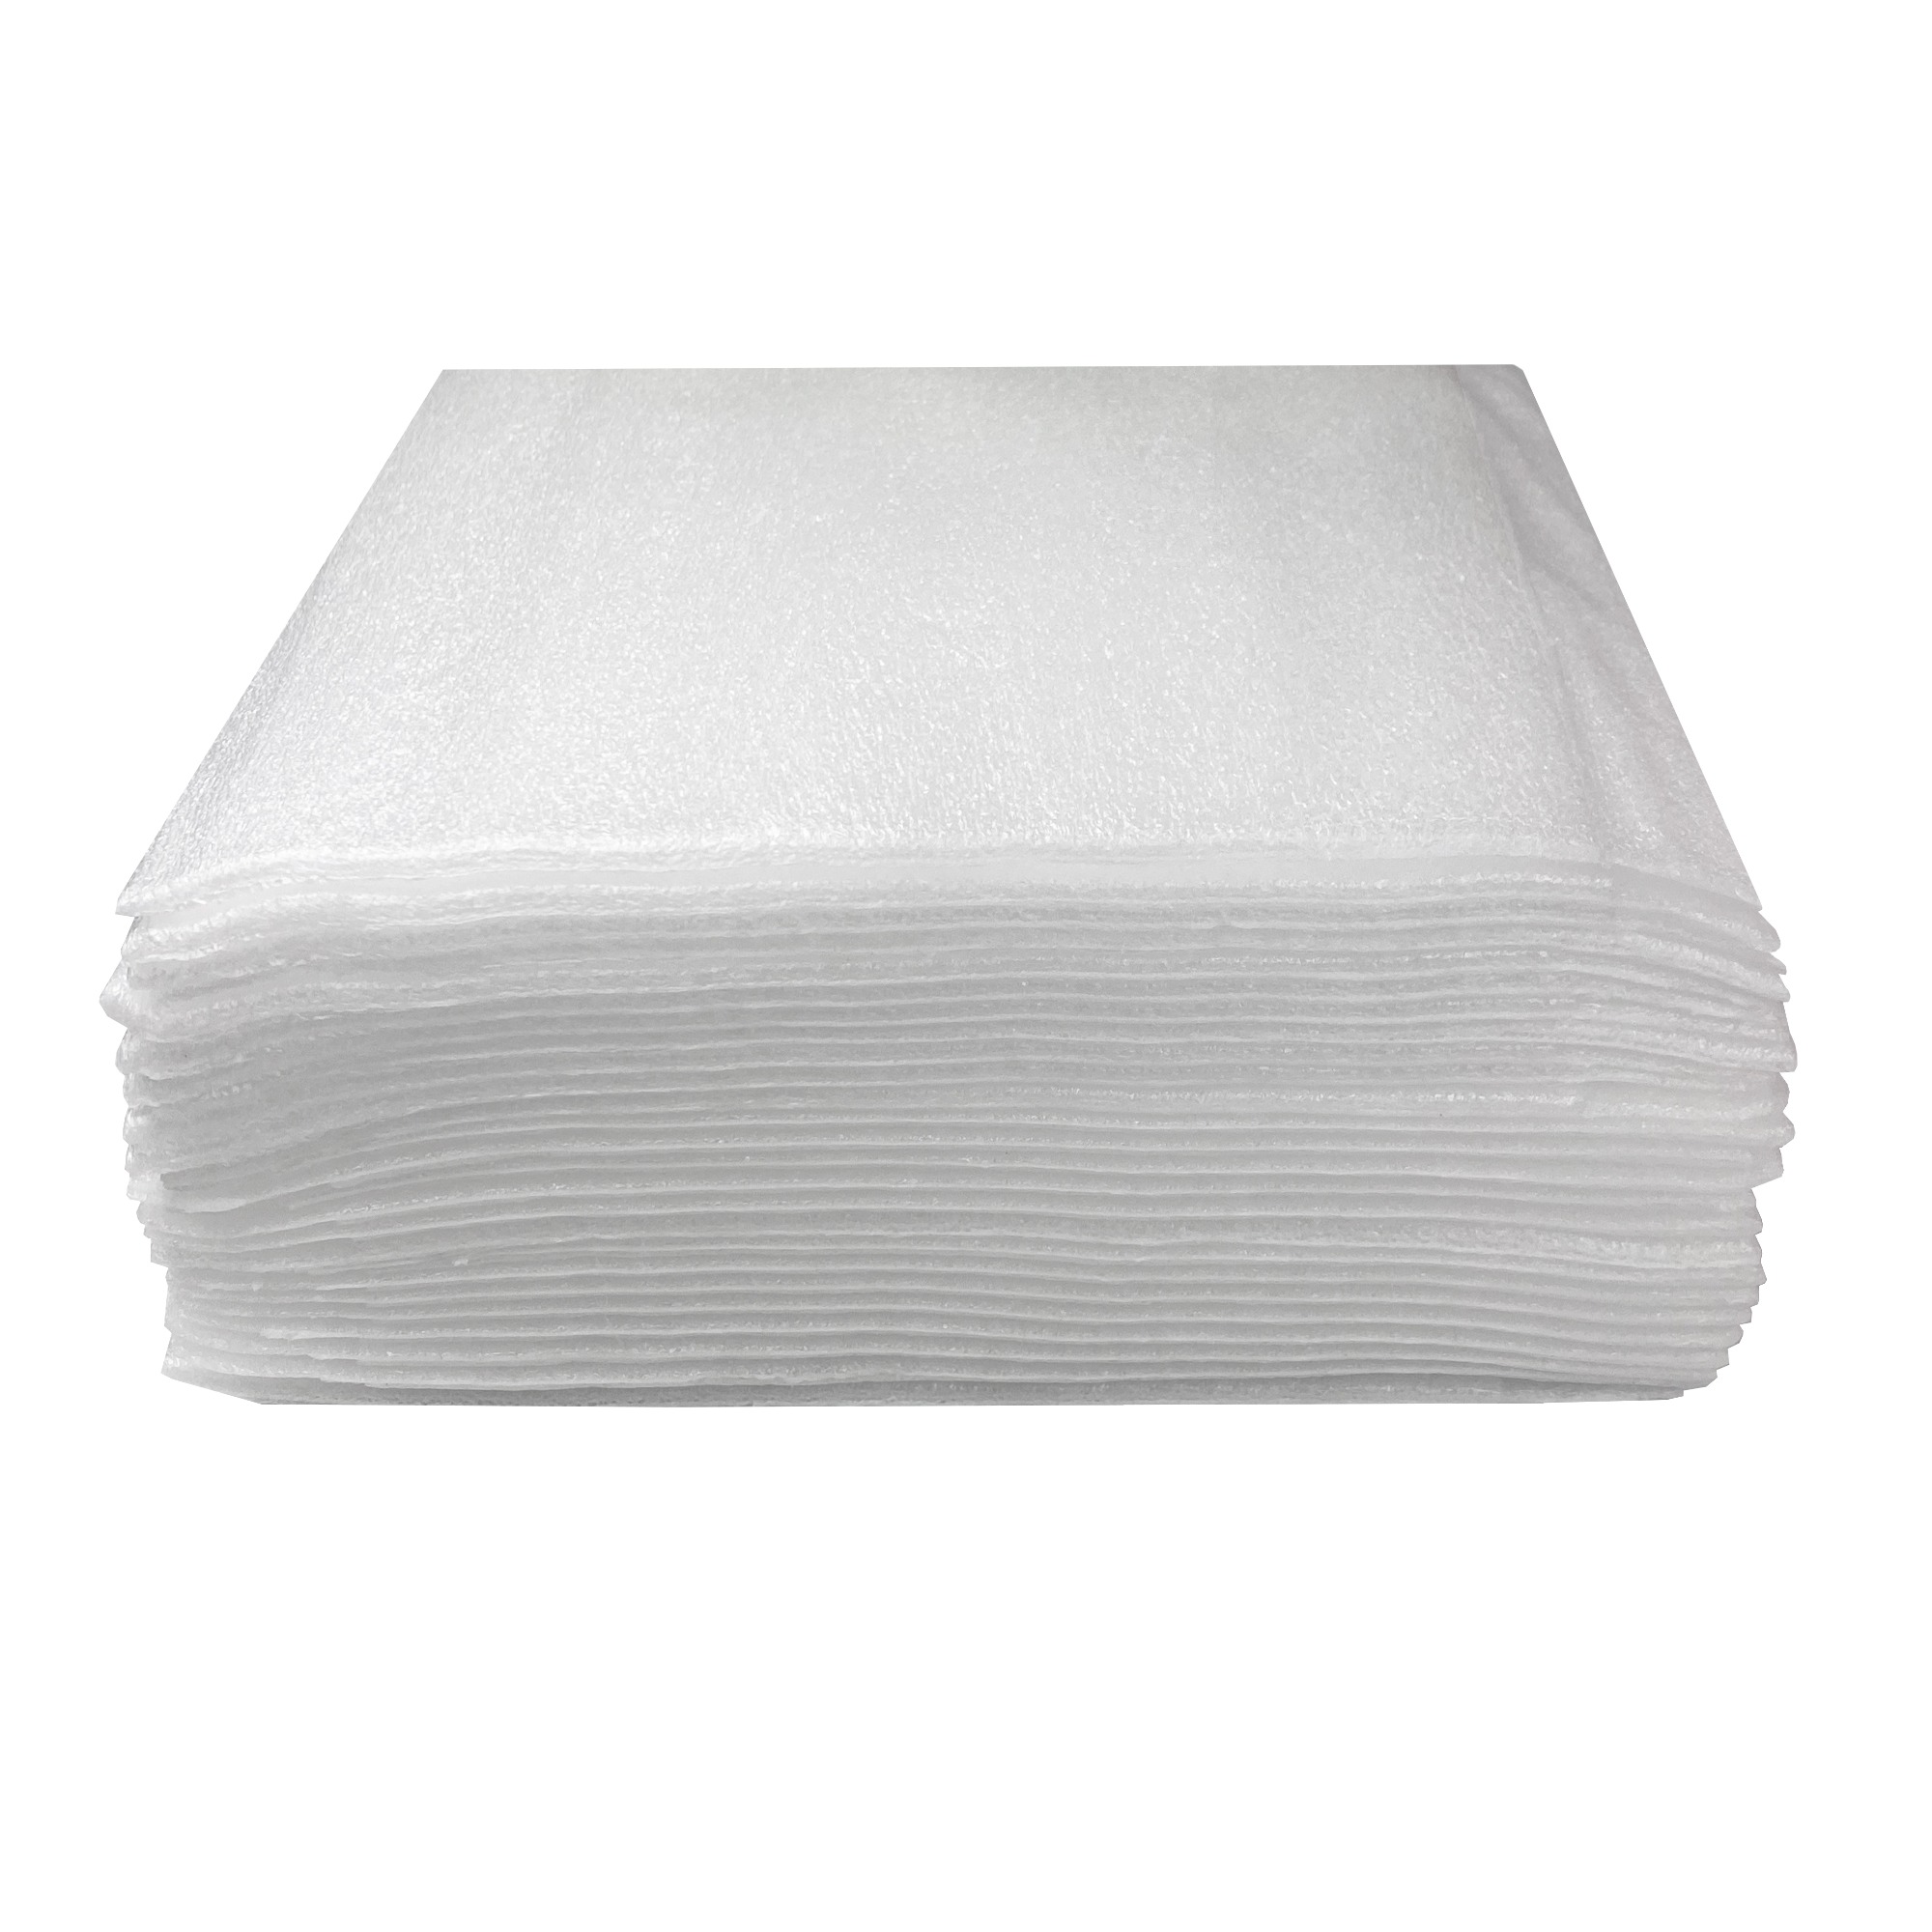 200 Pcs Foam Packing Pouches 12 x 12 Cushion Foam Pouches Packing Foam Dish  Packing Supplies for Moving Wrap Cushion Foam with 100 Pcs Fragile Labels